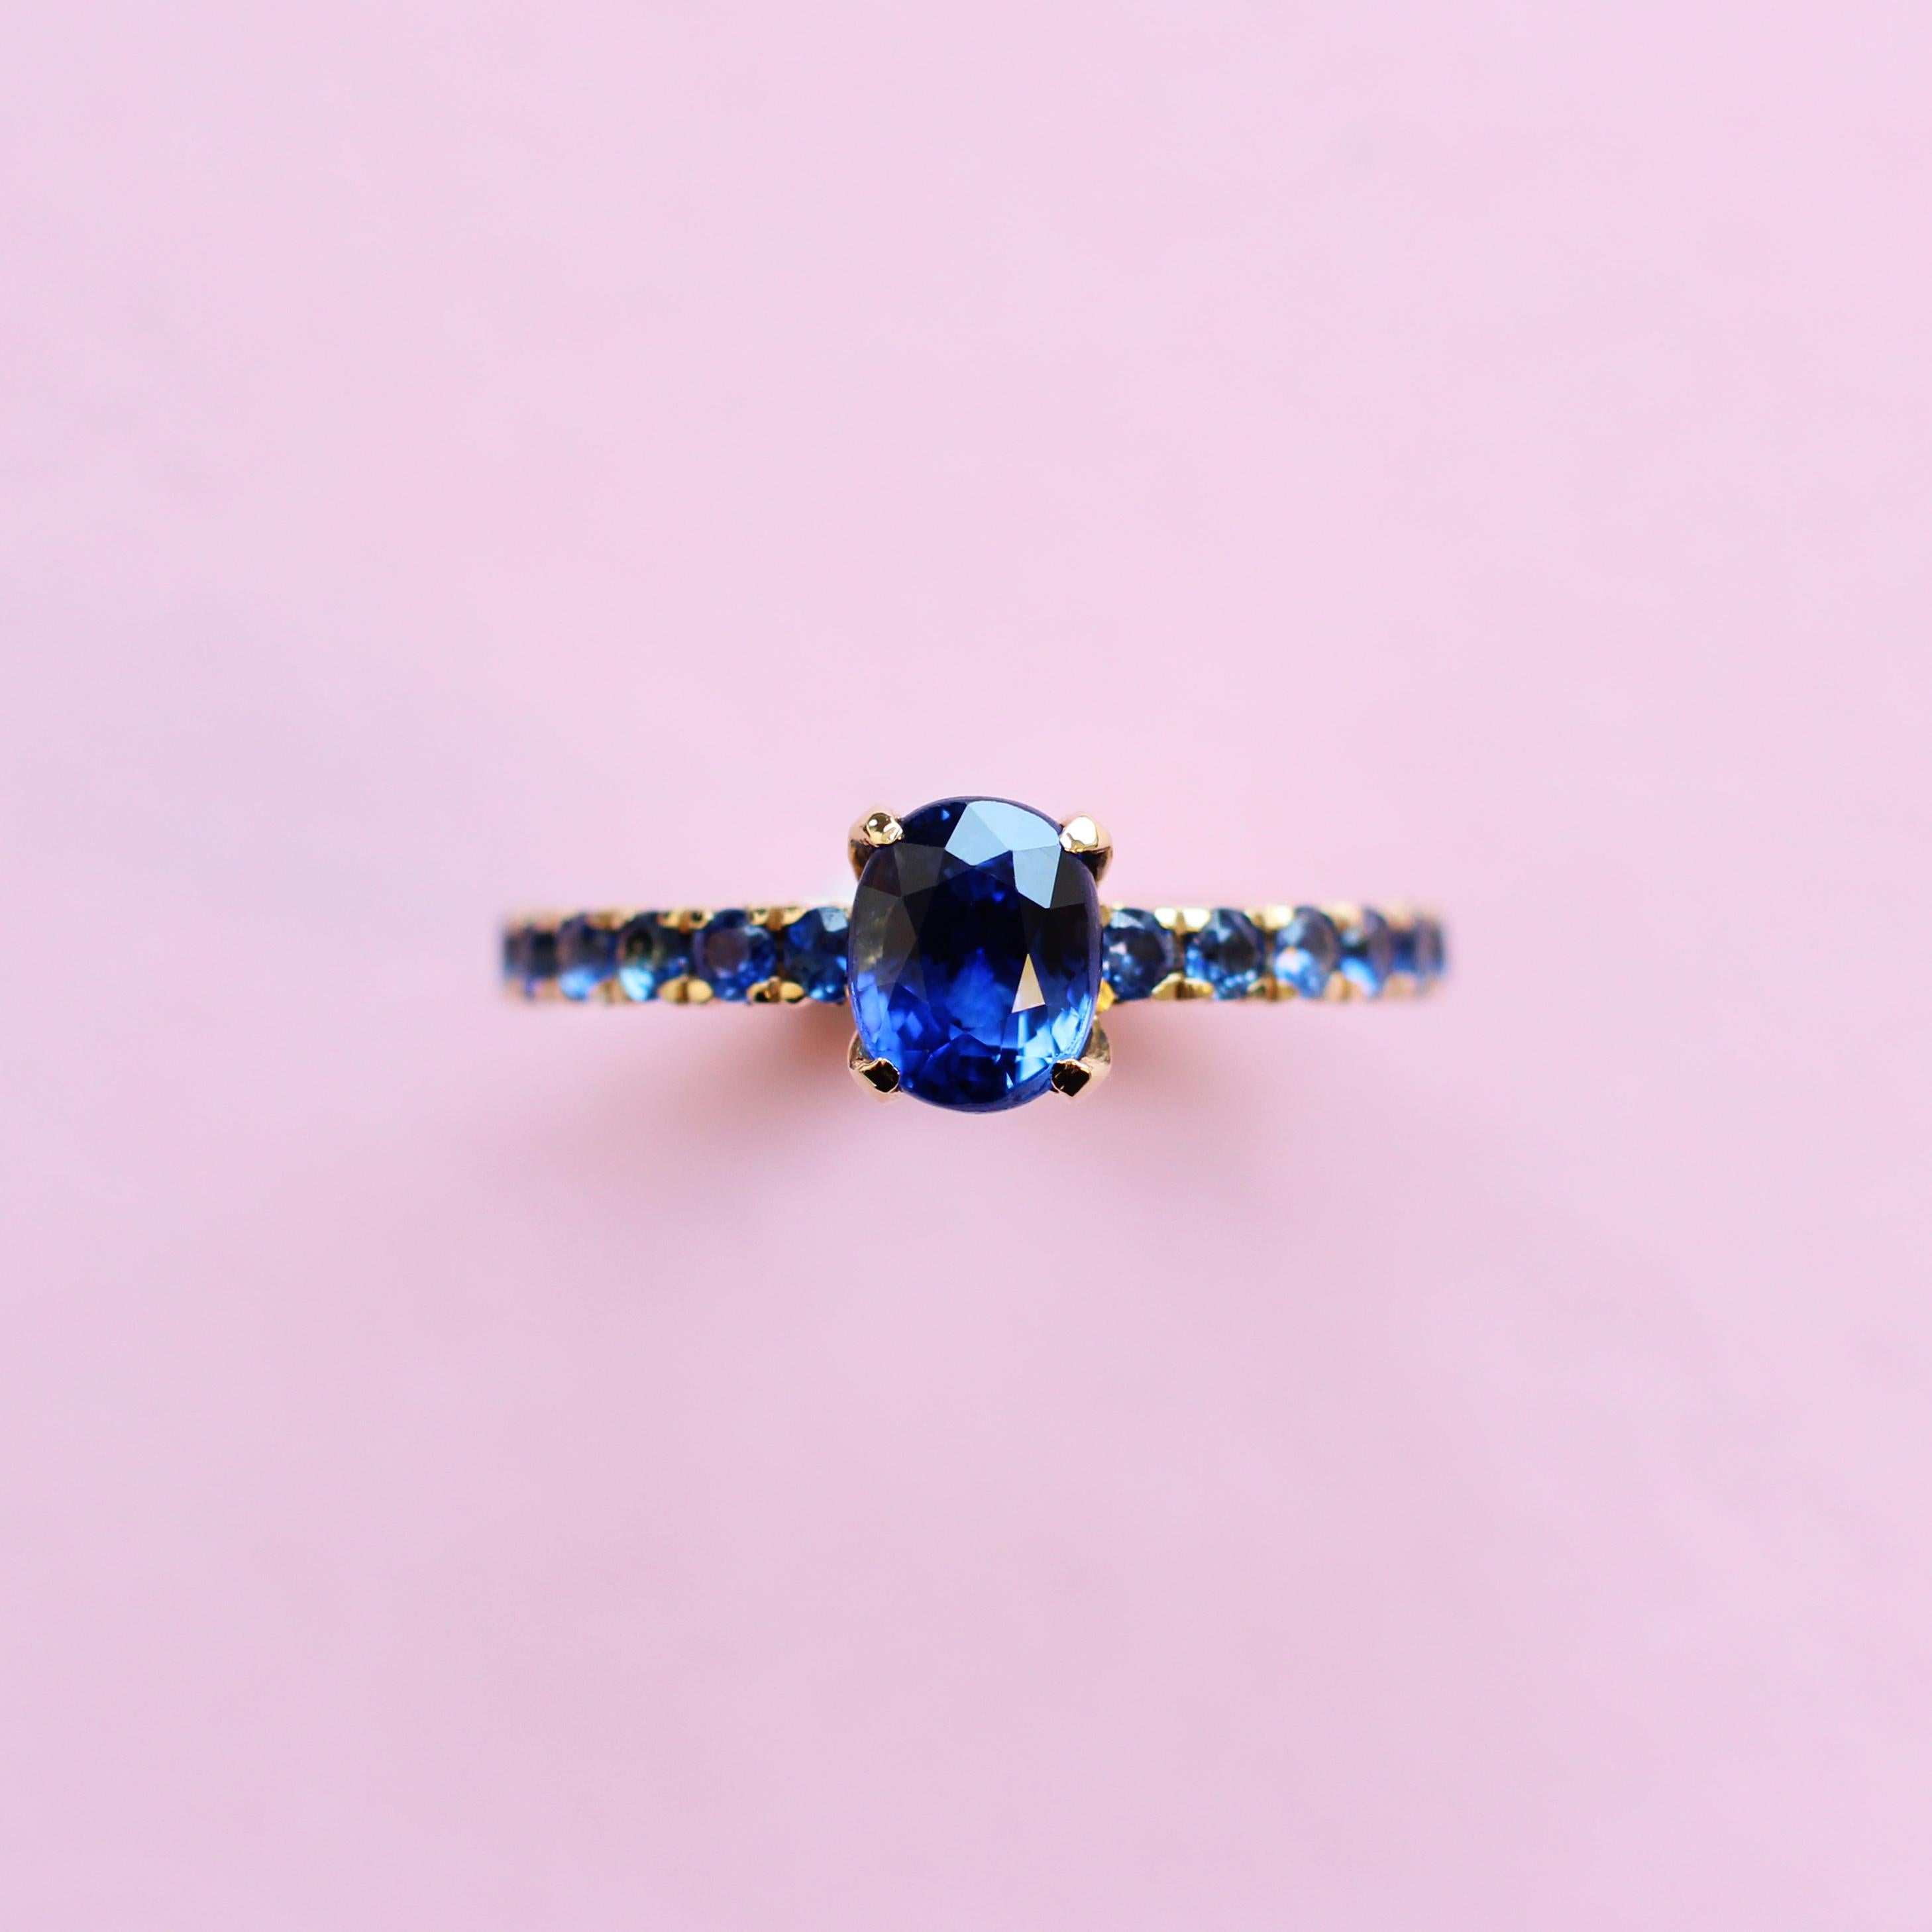 This elegant blossom solitaire ring combines beauty and style with a 1.53 ct blue sapphire sitting at its centre complemented with 12 shimmering shoulder sapphires. Made in 18k yellow gold with the blossom collection’s flower collet, this ring can